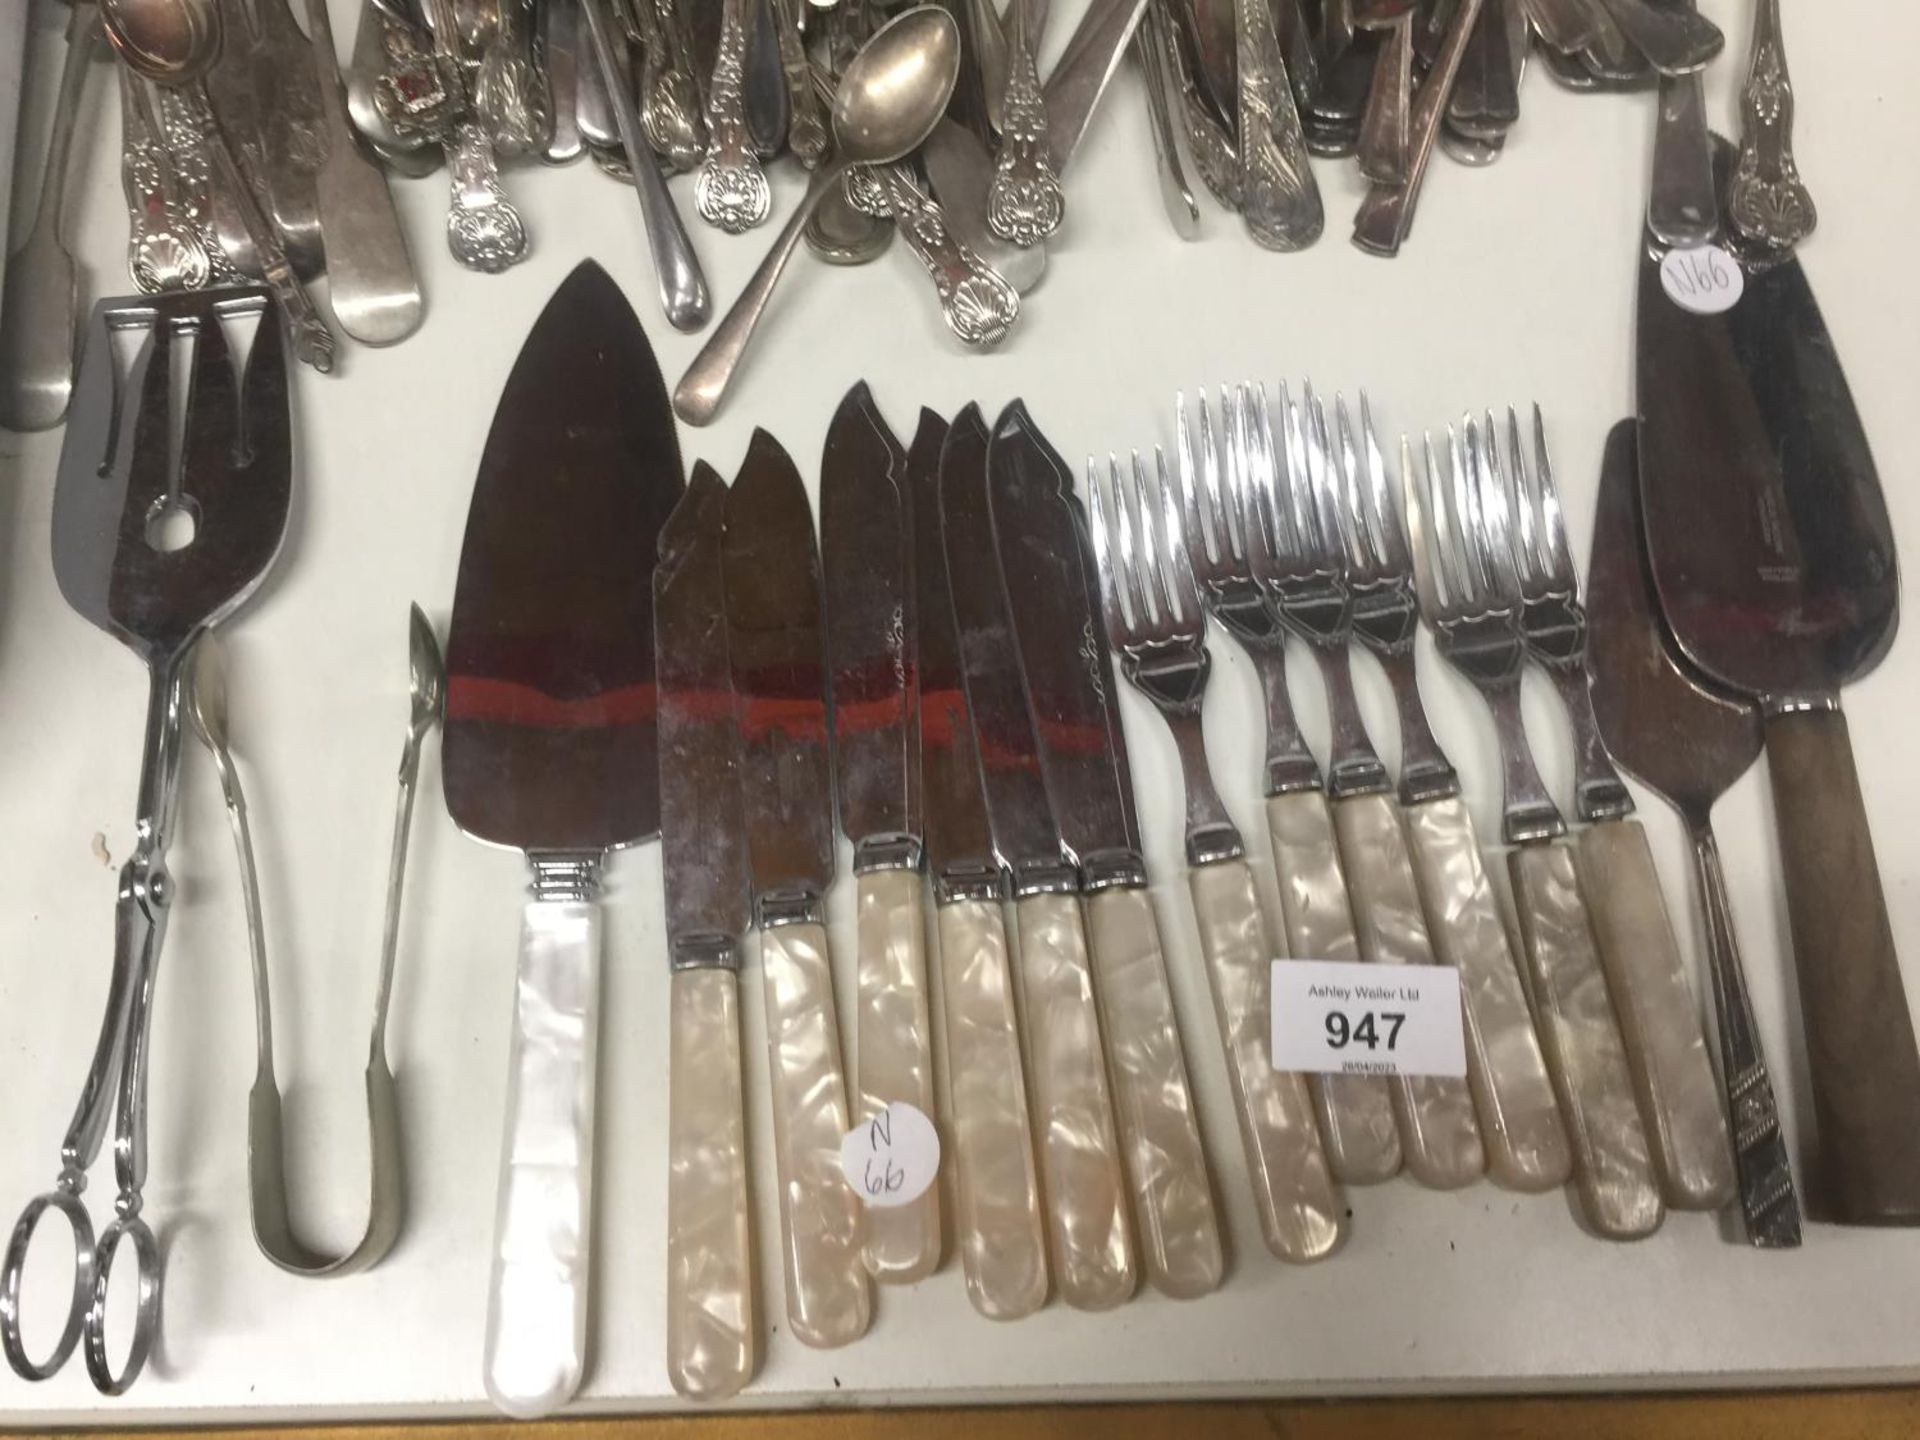 A LARGE AMOUNT OF FLATWARE TO INCLUDE KNIVES, FORKS, SPOONS, SERVERS, ETC - Image 2 of 4